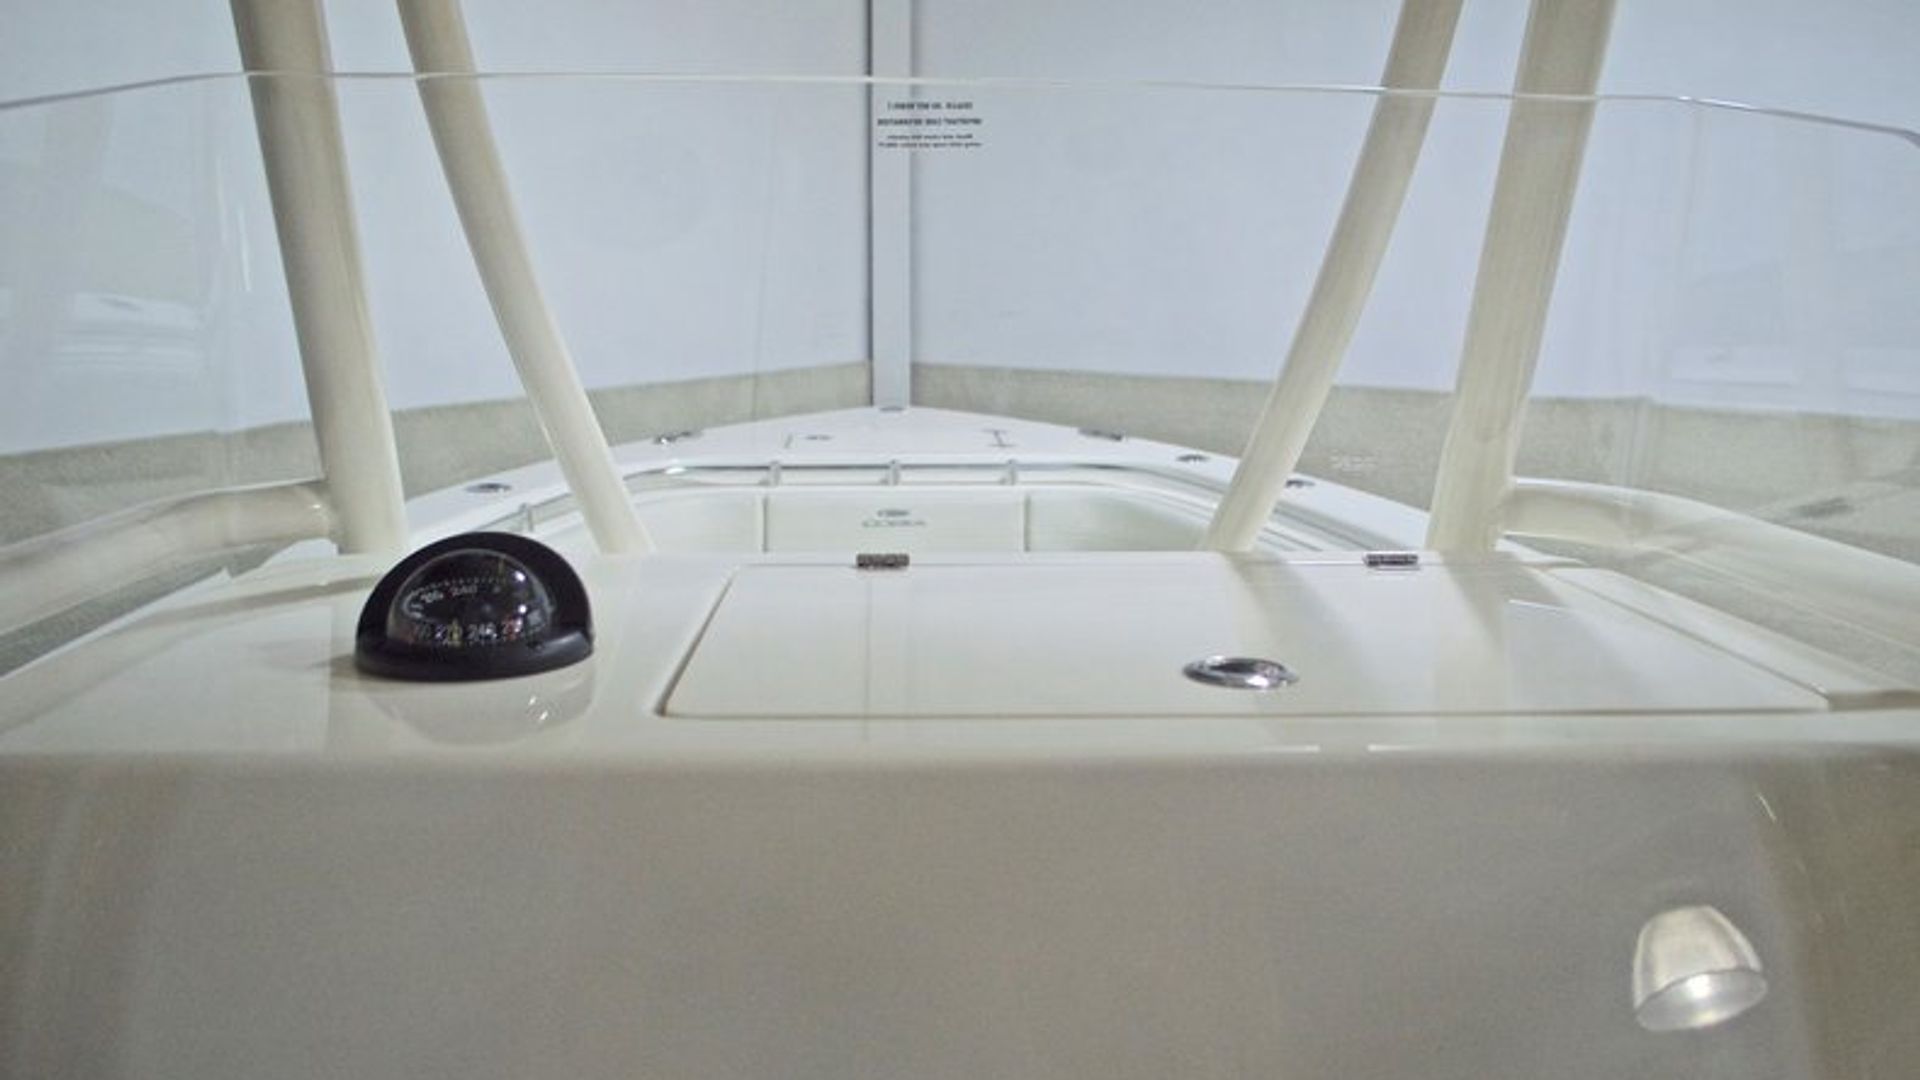 New 2017 Cobia 296 Center Console #N027 image 31